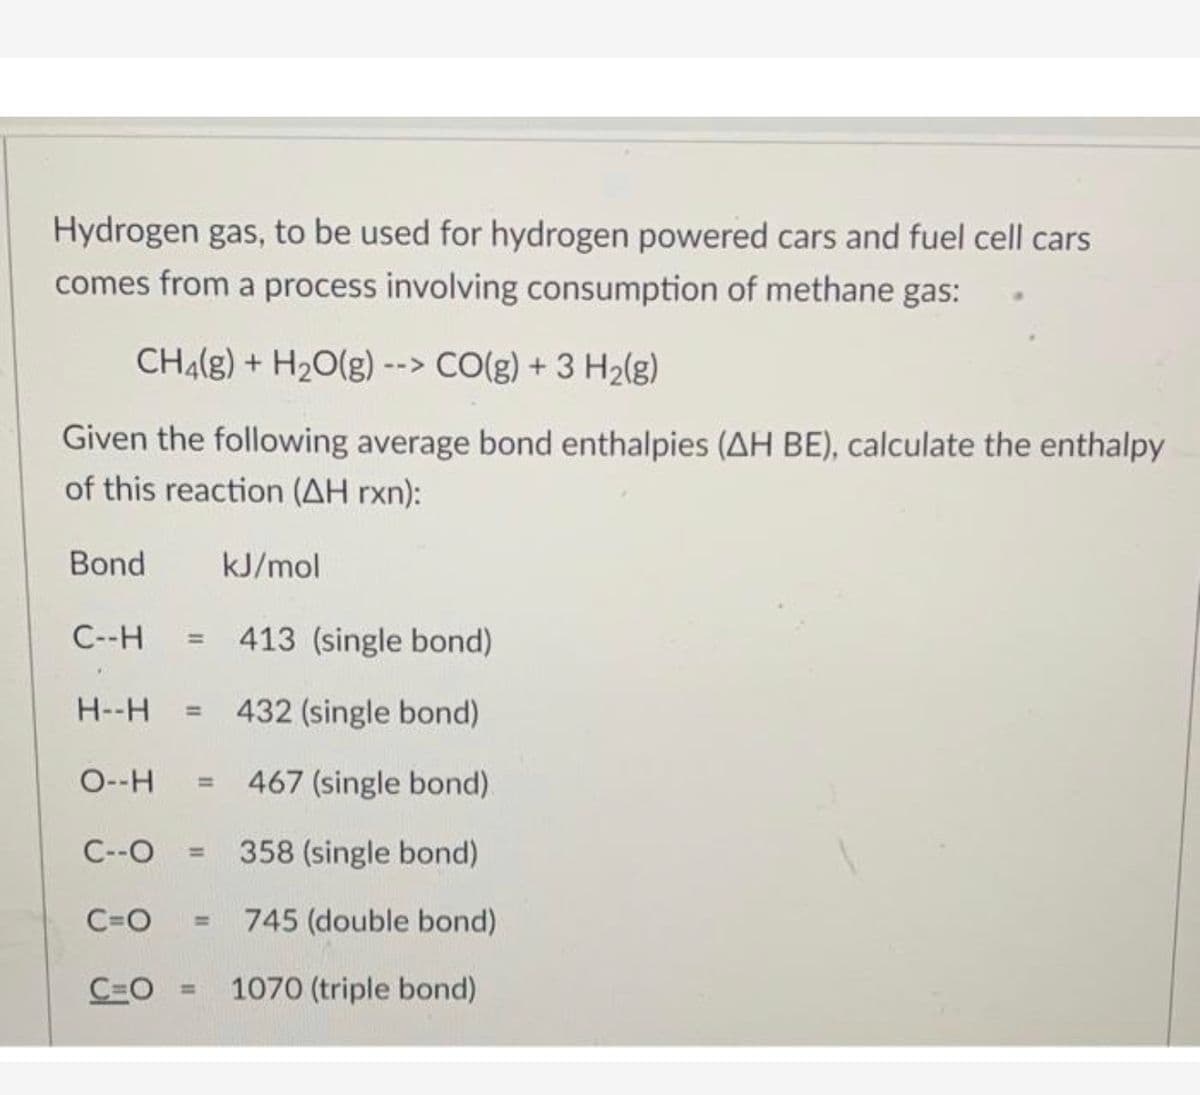 Hydrogen gas, to be used for hydrogen powered cars and fuel cell cars
comes from a process involving consumption of methane gas:
CH4(g) + H2O(g) --> CO(g) + 3 H2(g)
Given the following average bond enthalpies (AH BE), calculate the enthalpy
of this reaction (AH rxn):
Bond
kJ/mol
C--H
413 (single bond)
H--H
432 (single bond)
%3D
O--H
467 (single bond).
%3D
C--O
358 (single bond)
%3D
C=O
745 (double bond)
%3D
C=O =
1070 (triple bond)
